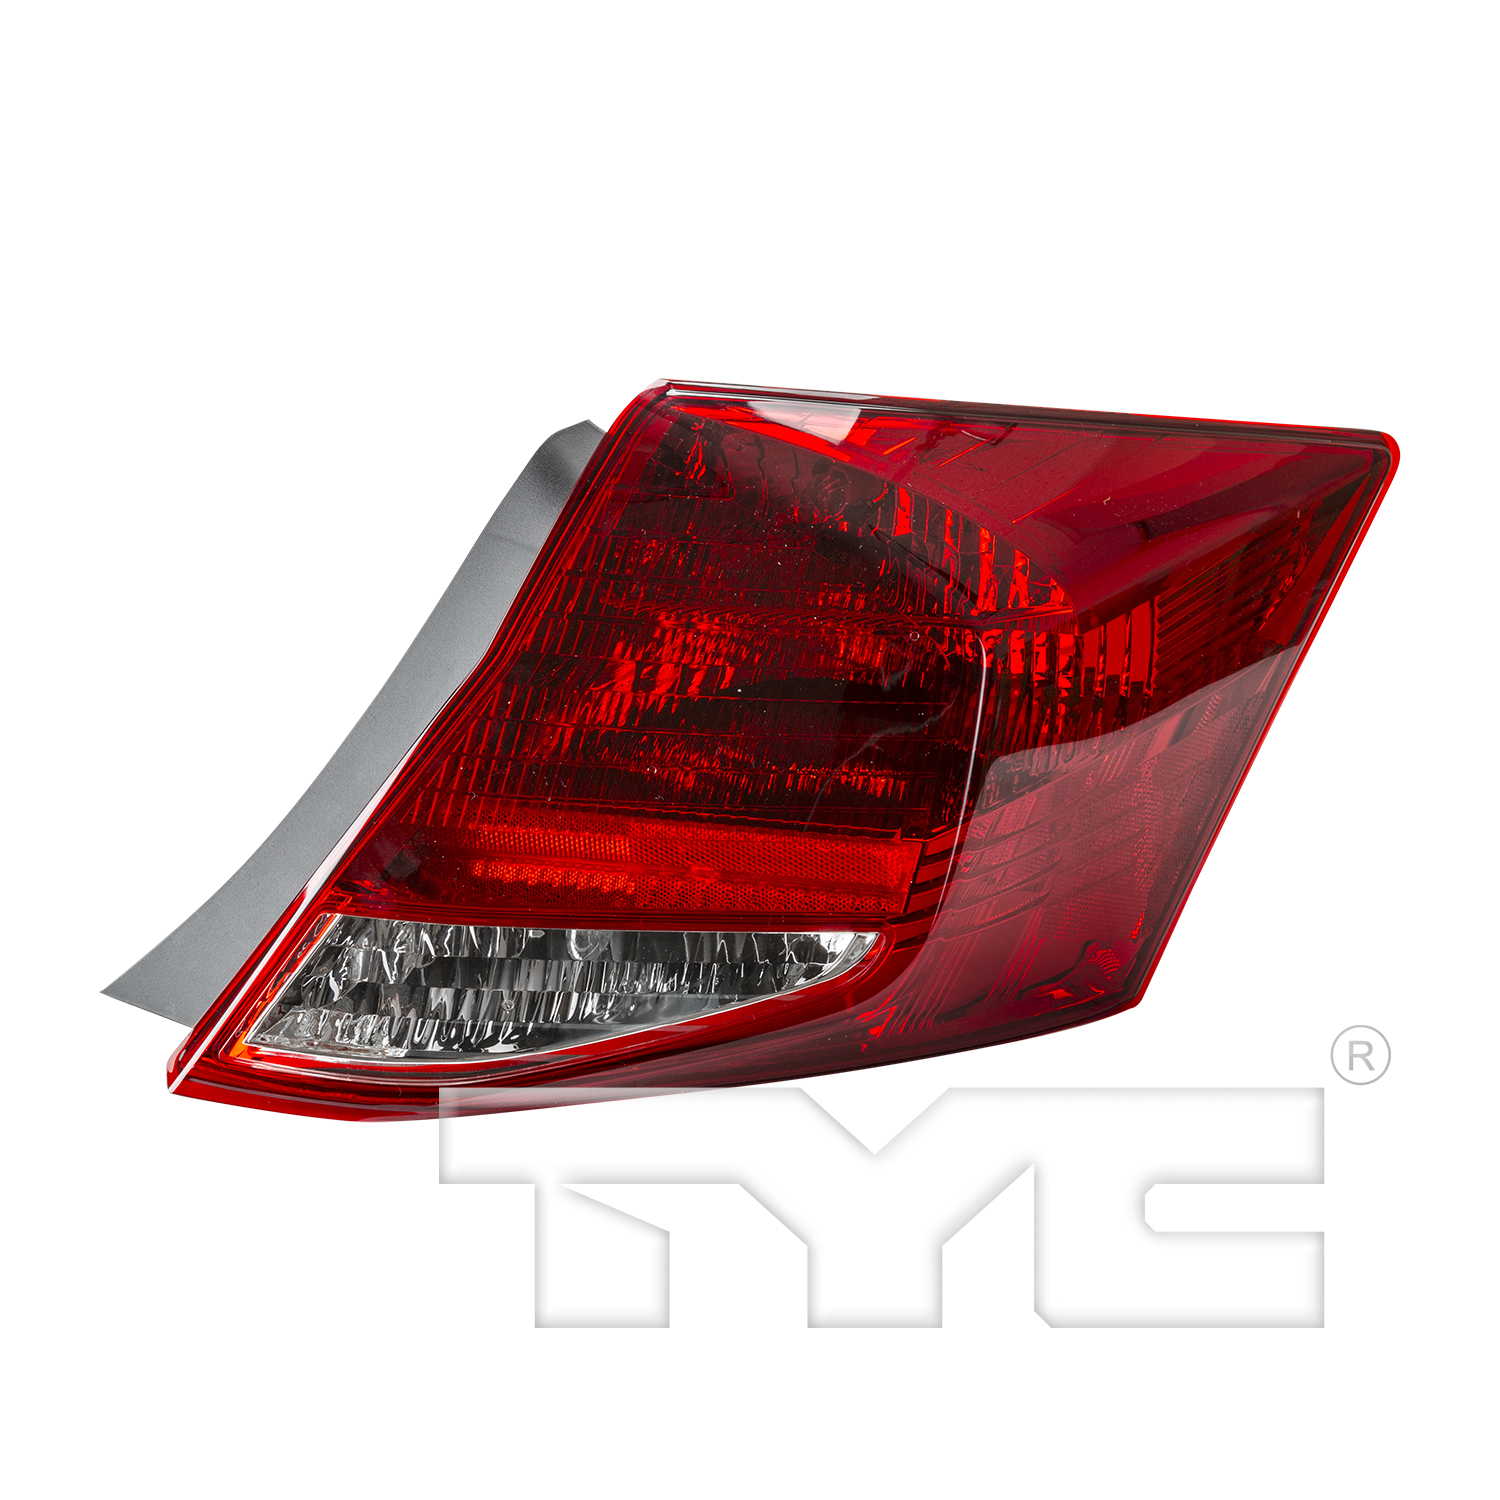 Aftermarket TAILLIGHTS for HONDA - ACCORD, ACCORD,11-12,RT Taillamp assy